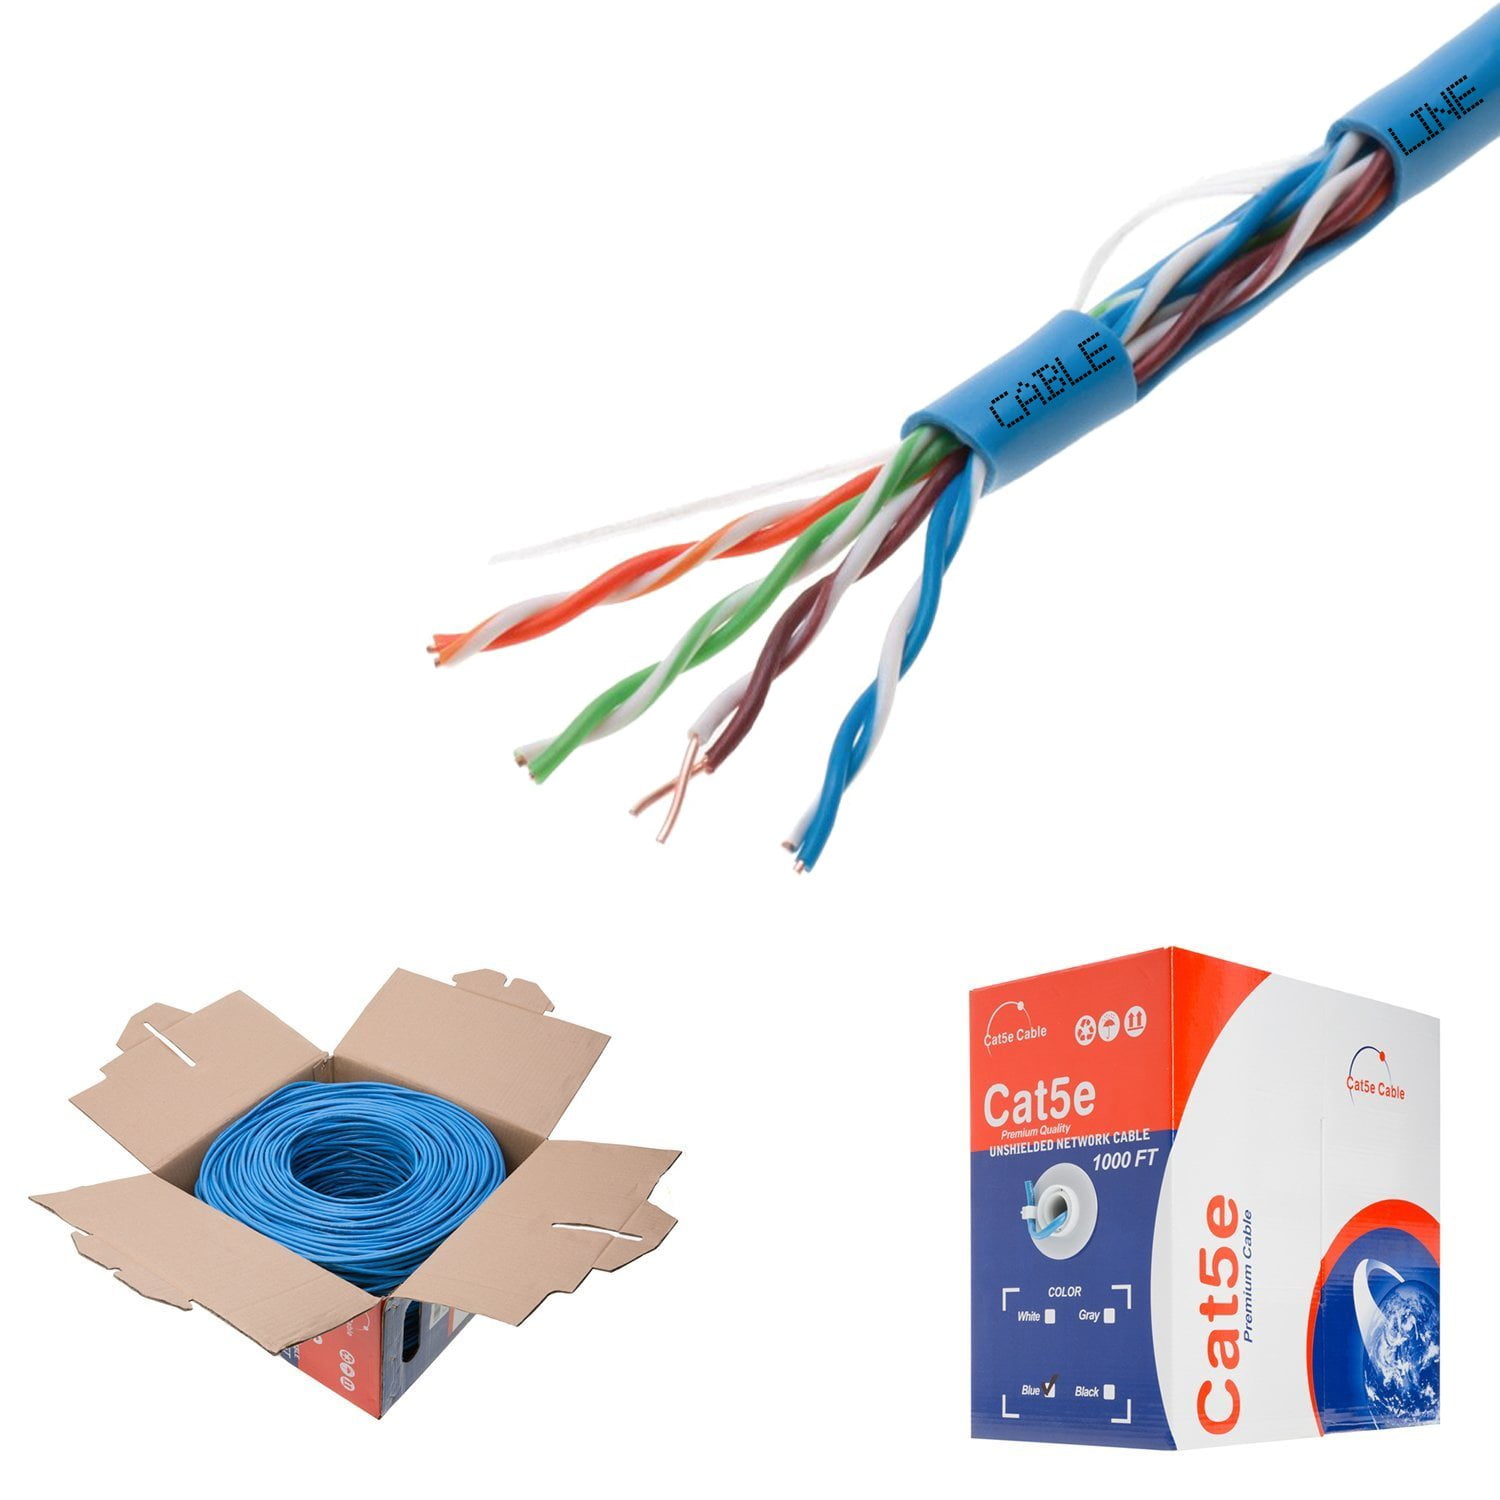 VIVO Red 1,000ft Bulk Cat5e CABLE-V001R Indoor Cat-5e Wire Network Installations CCA Ethernet Cable UTP Pull Box 24 AWG 